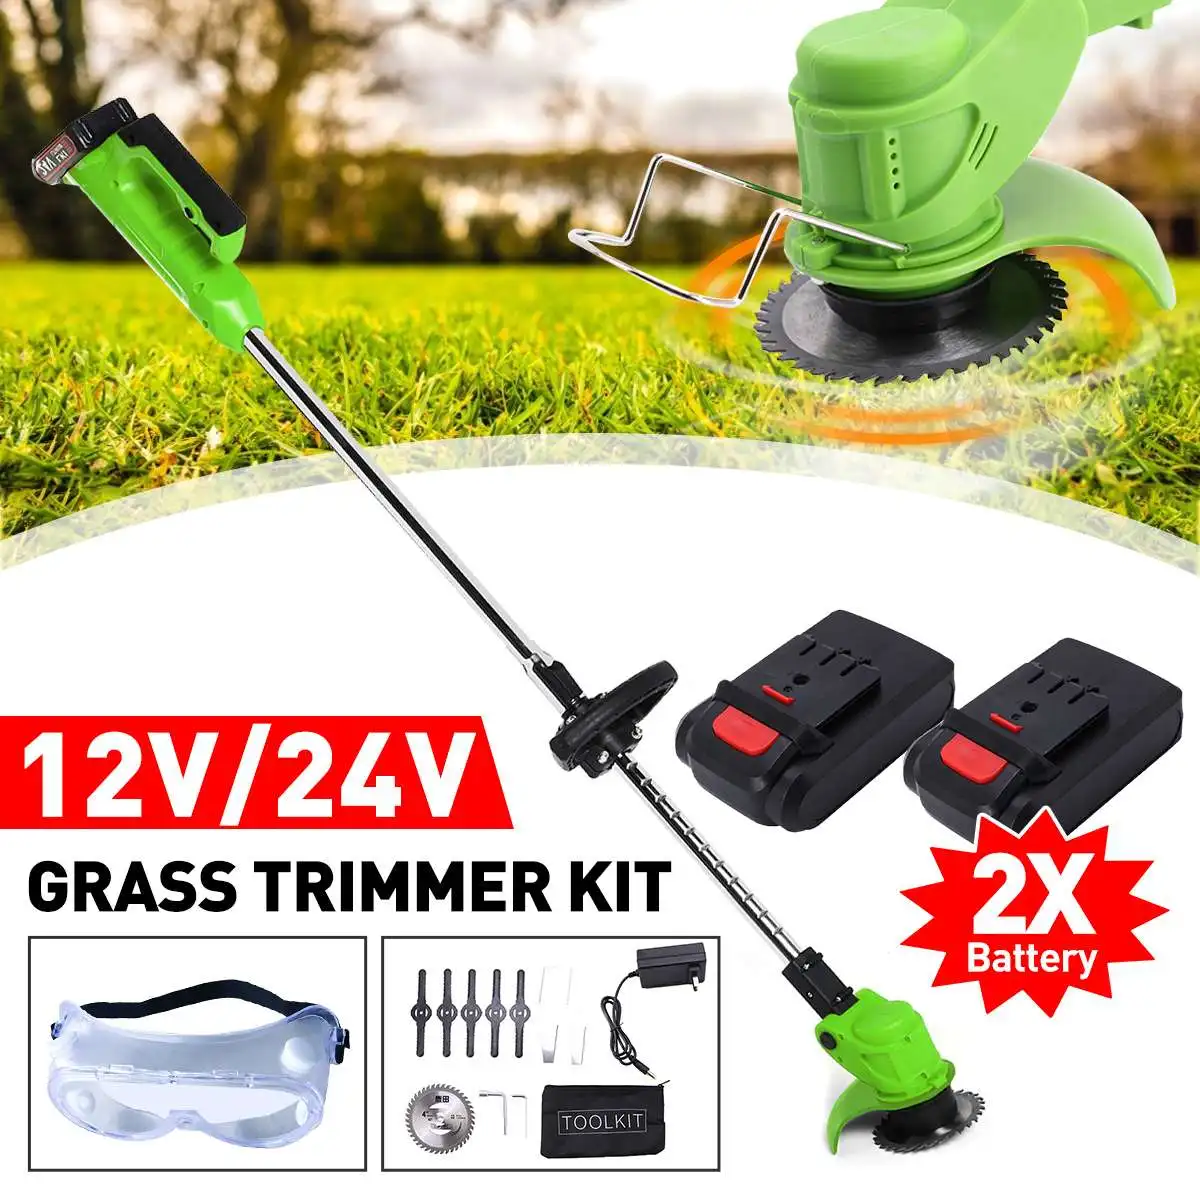 12V 24V Cordless Electric Grass Trimmer Lawn Mower Electric Trimmer Weeder Grass Pruning Garden Tools With 2 Li-ion Battery